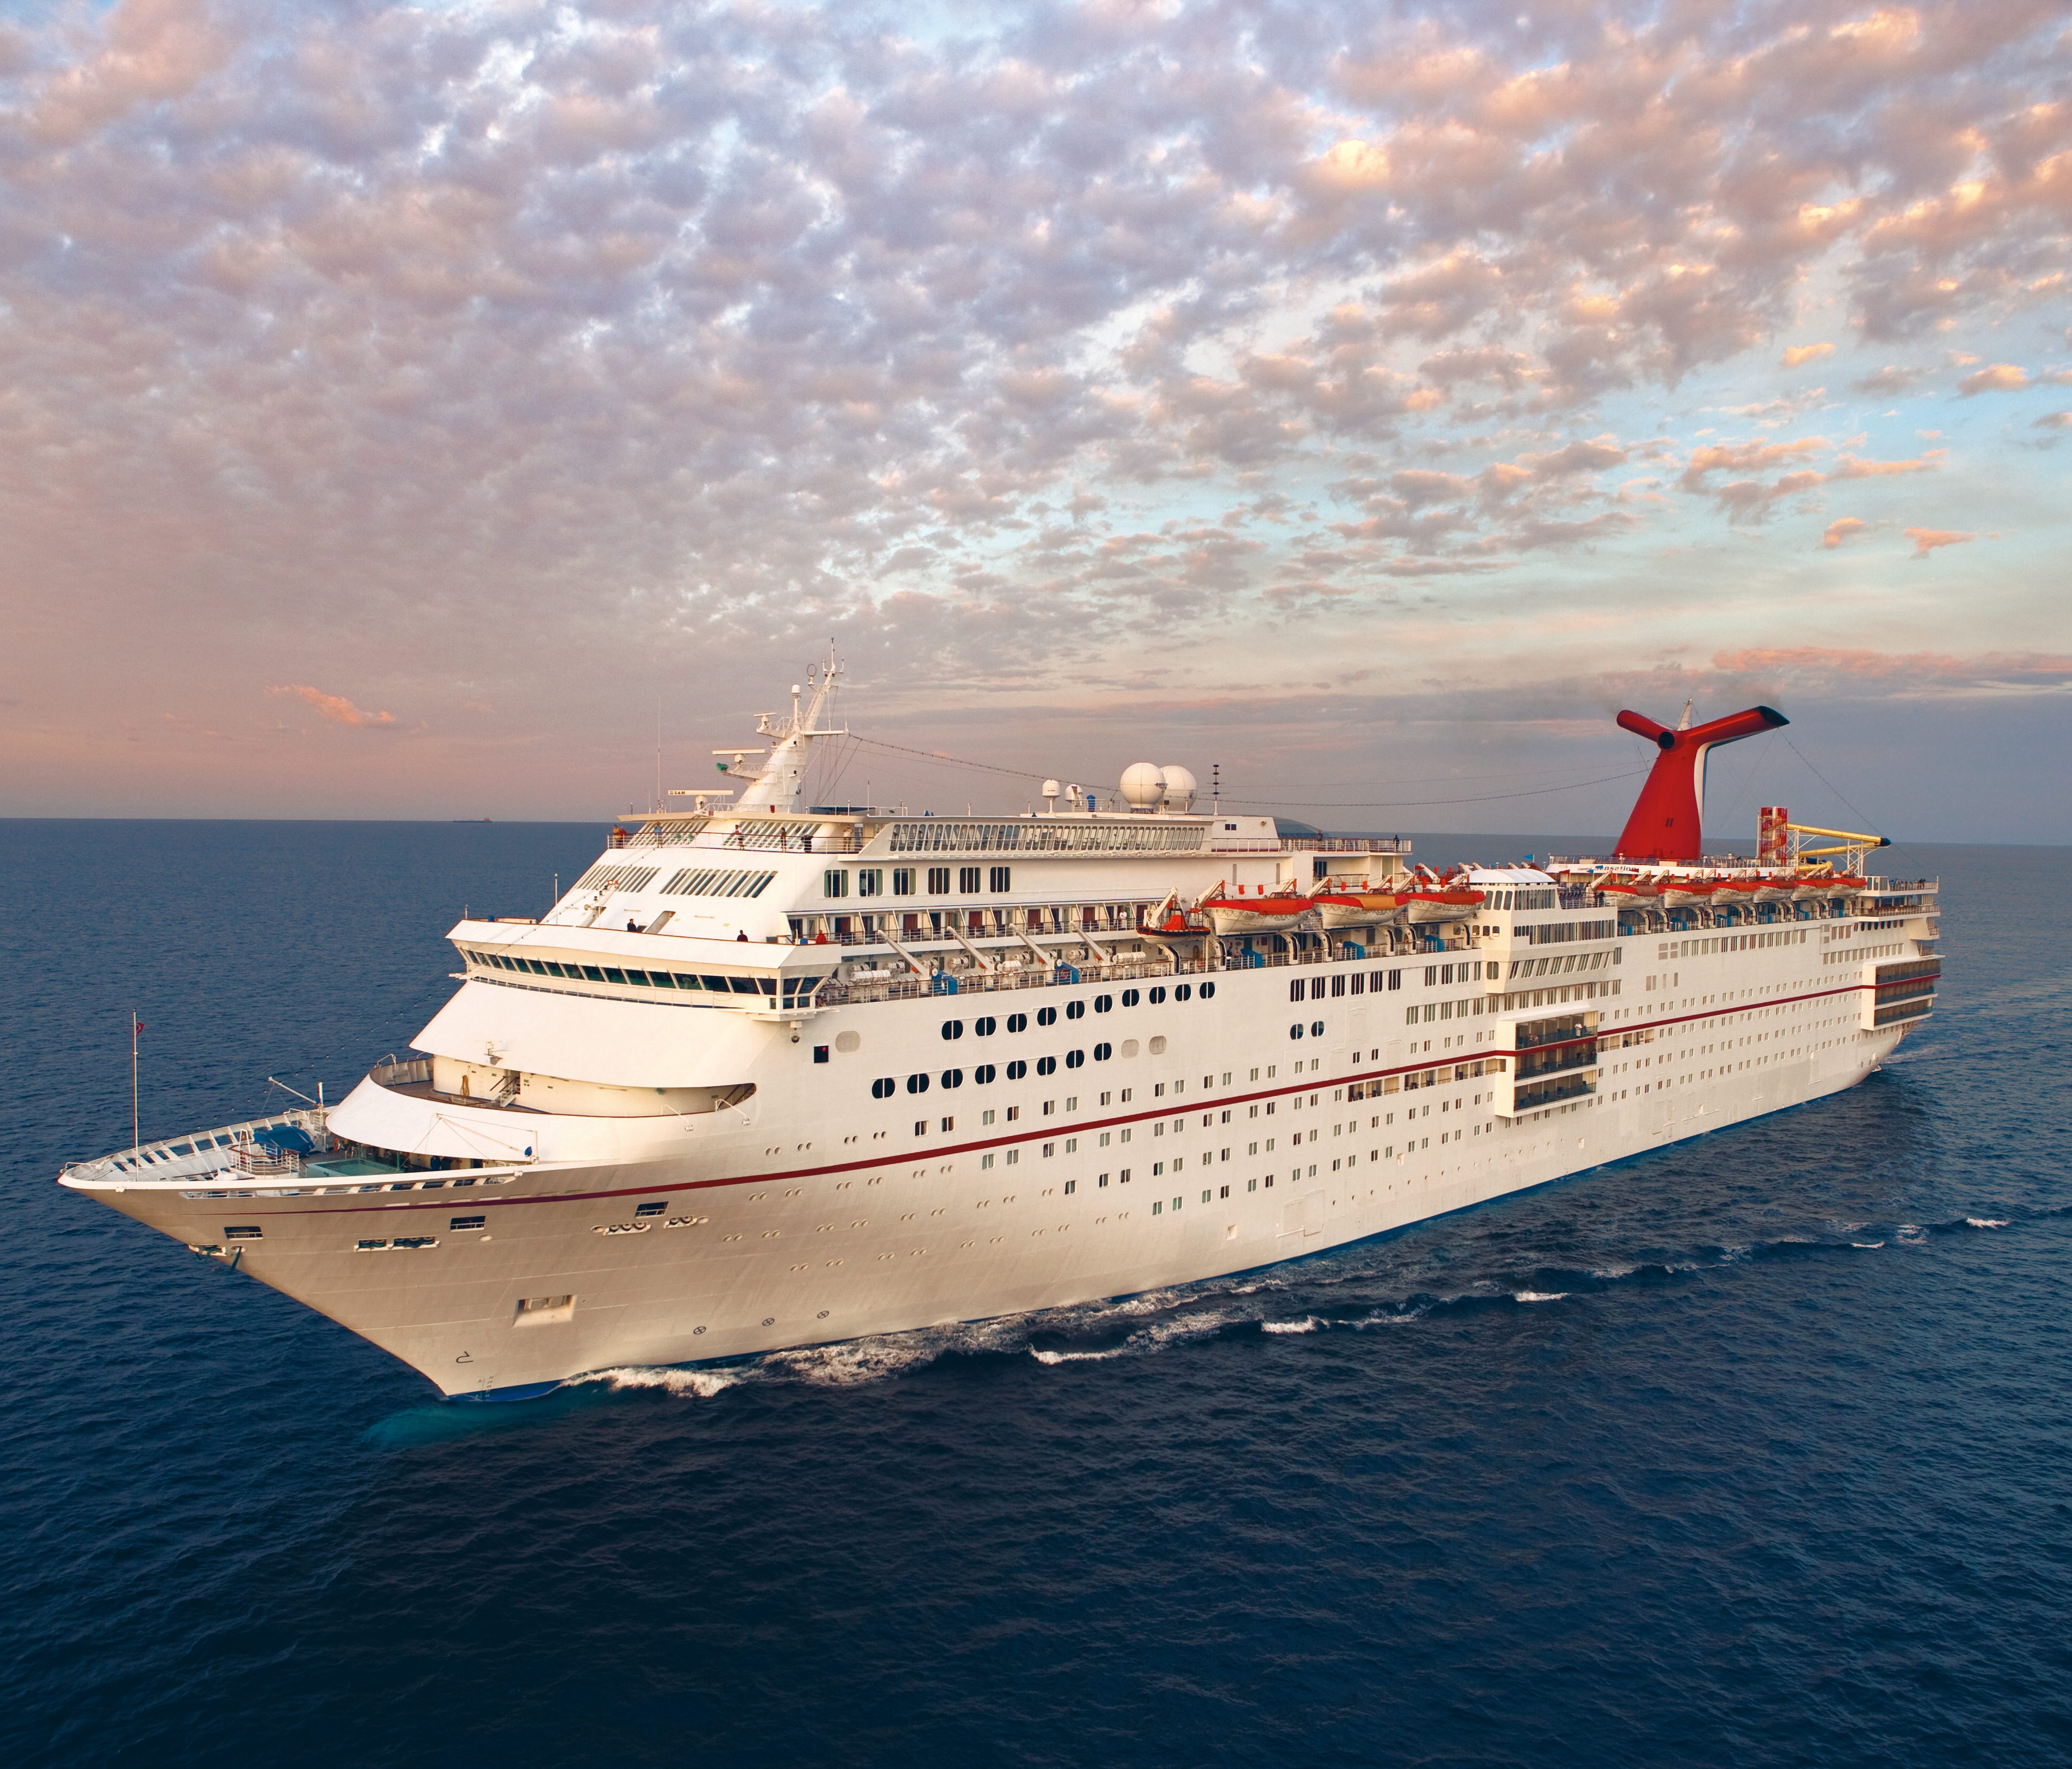 The idea of nightlife on Carnival ships is something for everyone (except maybe people who like things quiet).